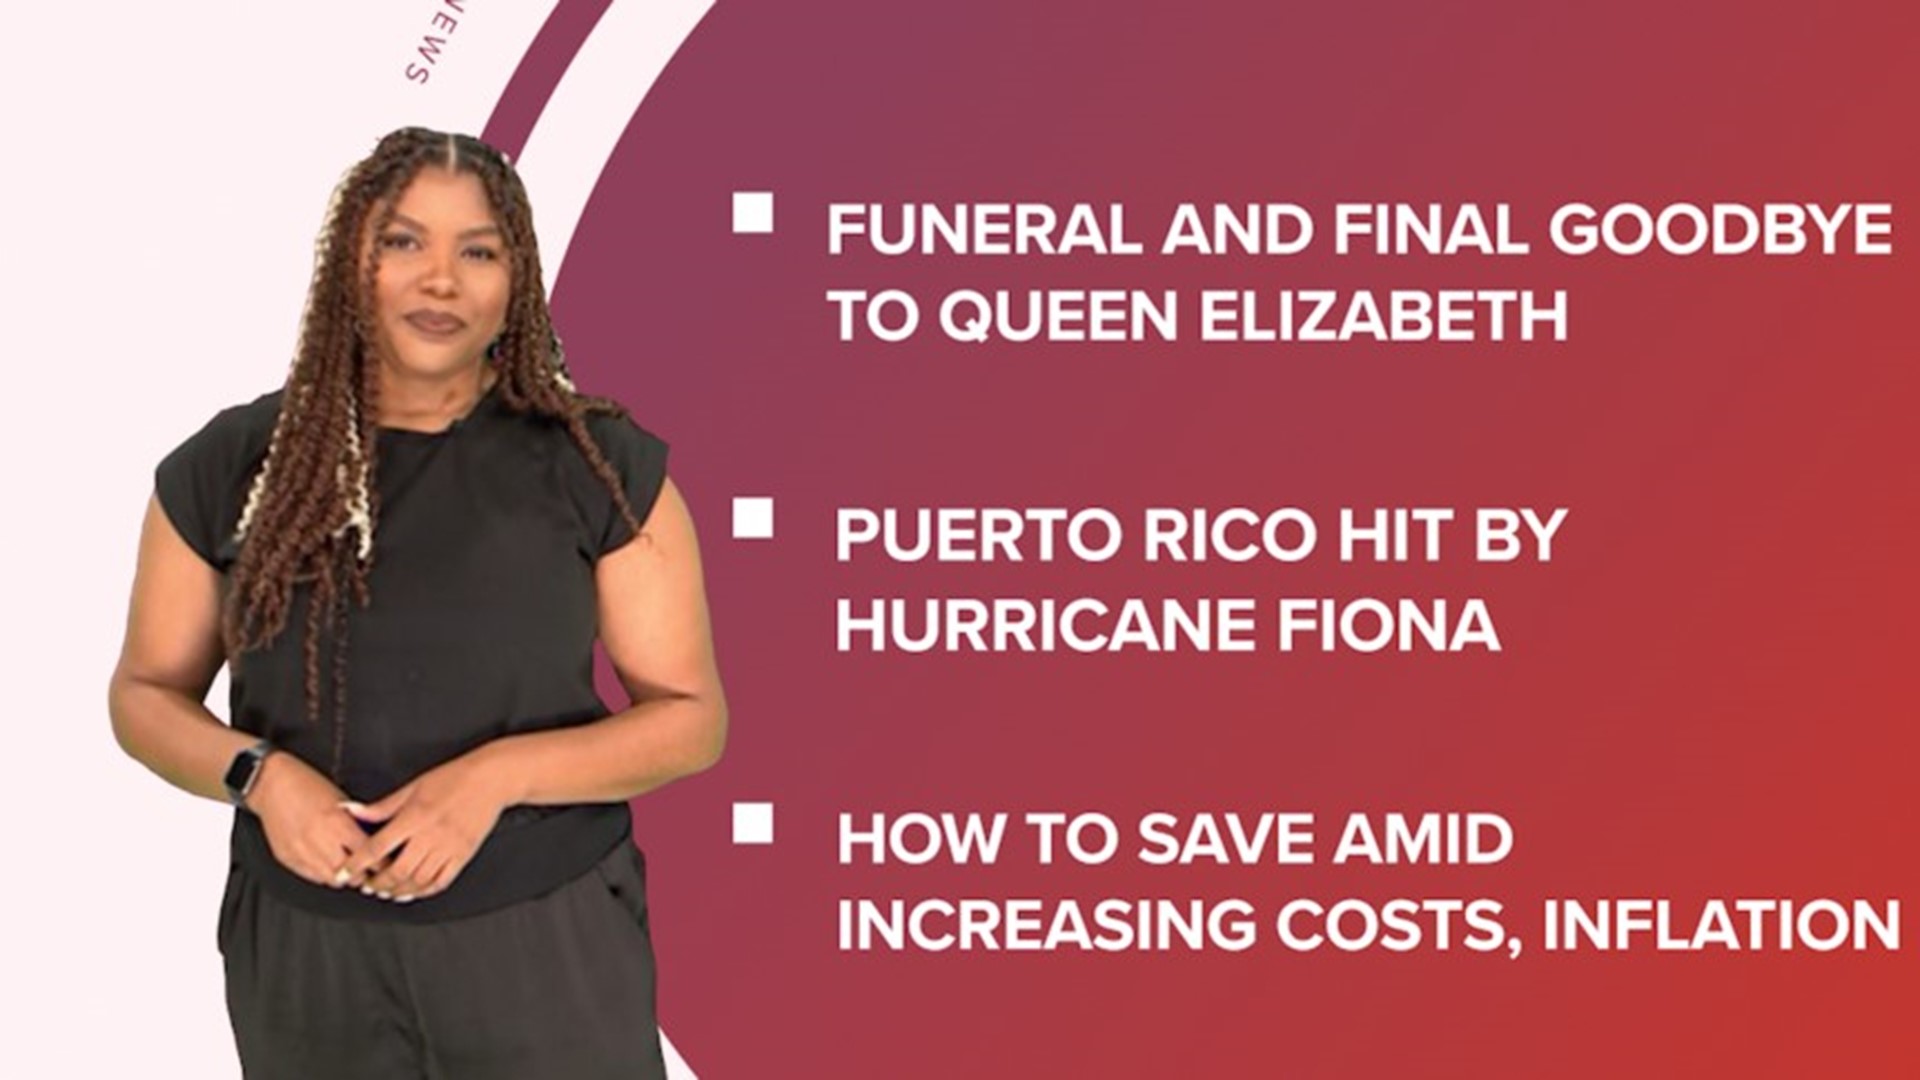 A look at what is happening in the news from the funeral for Queen Elizabeth II to Hurricane Fiona causing power outages in Puerto Rico and the WNBA championships.